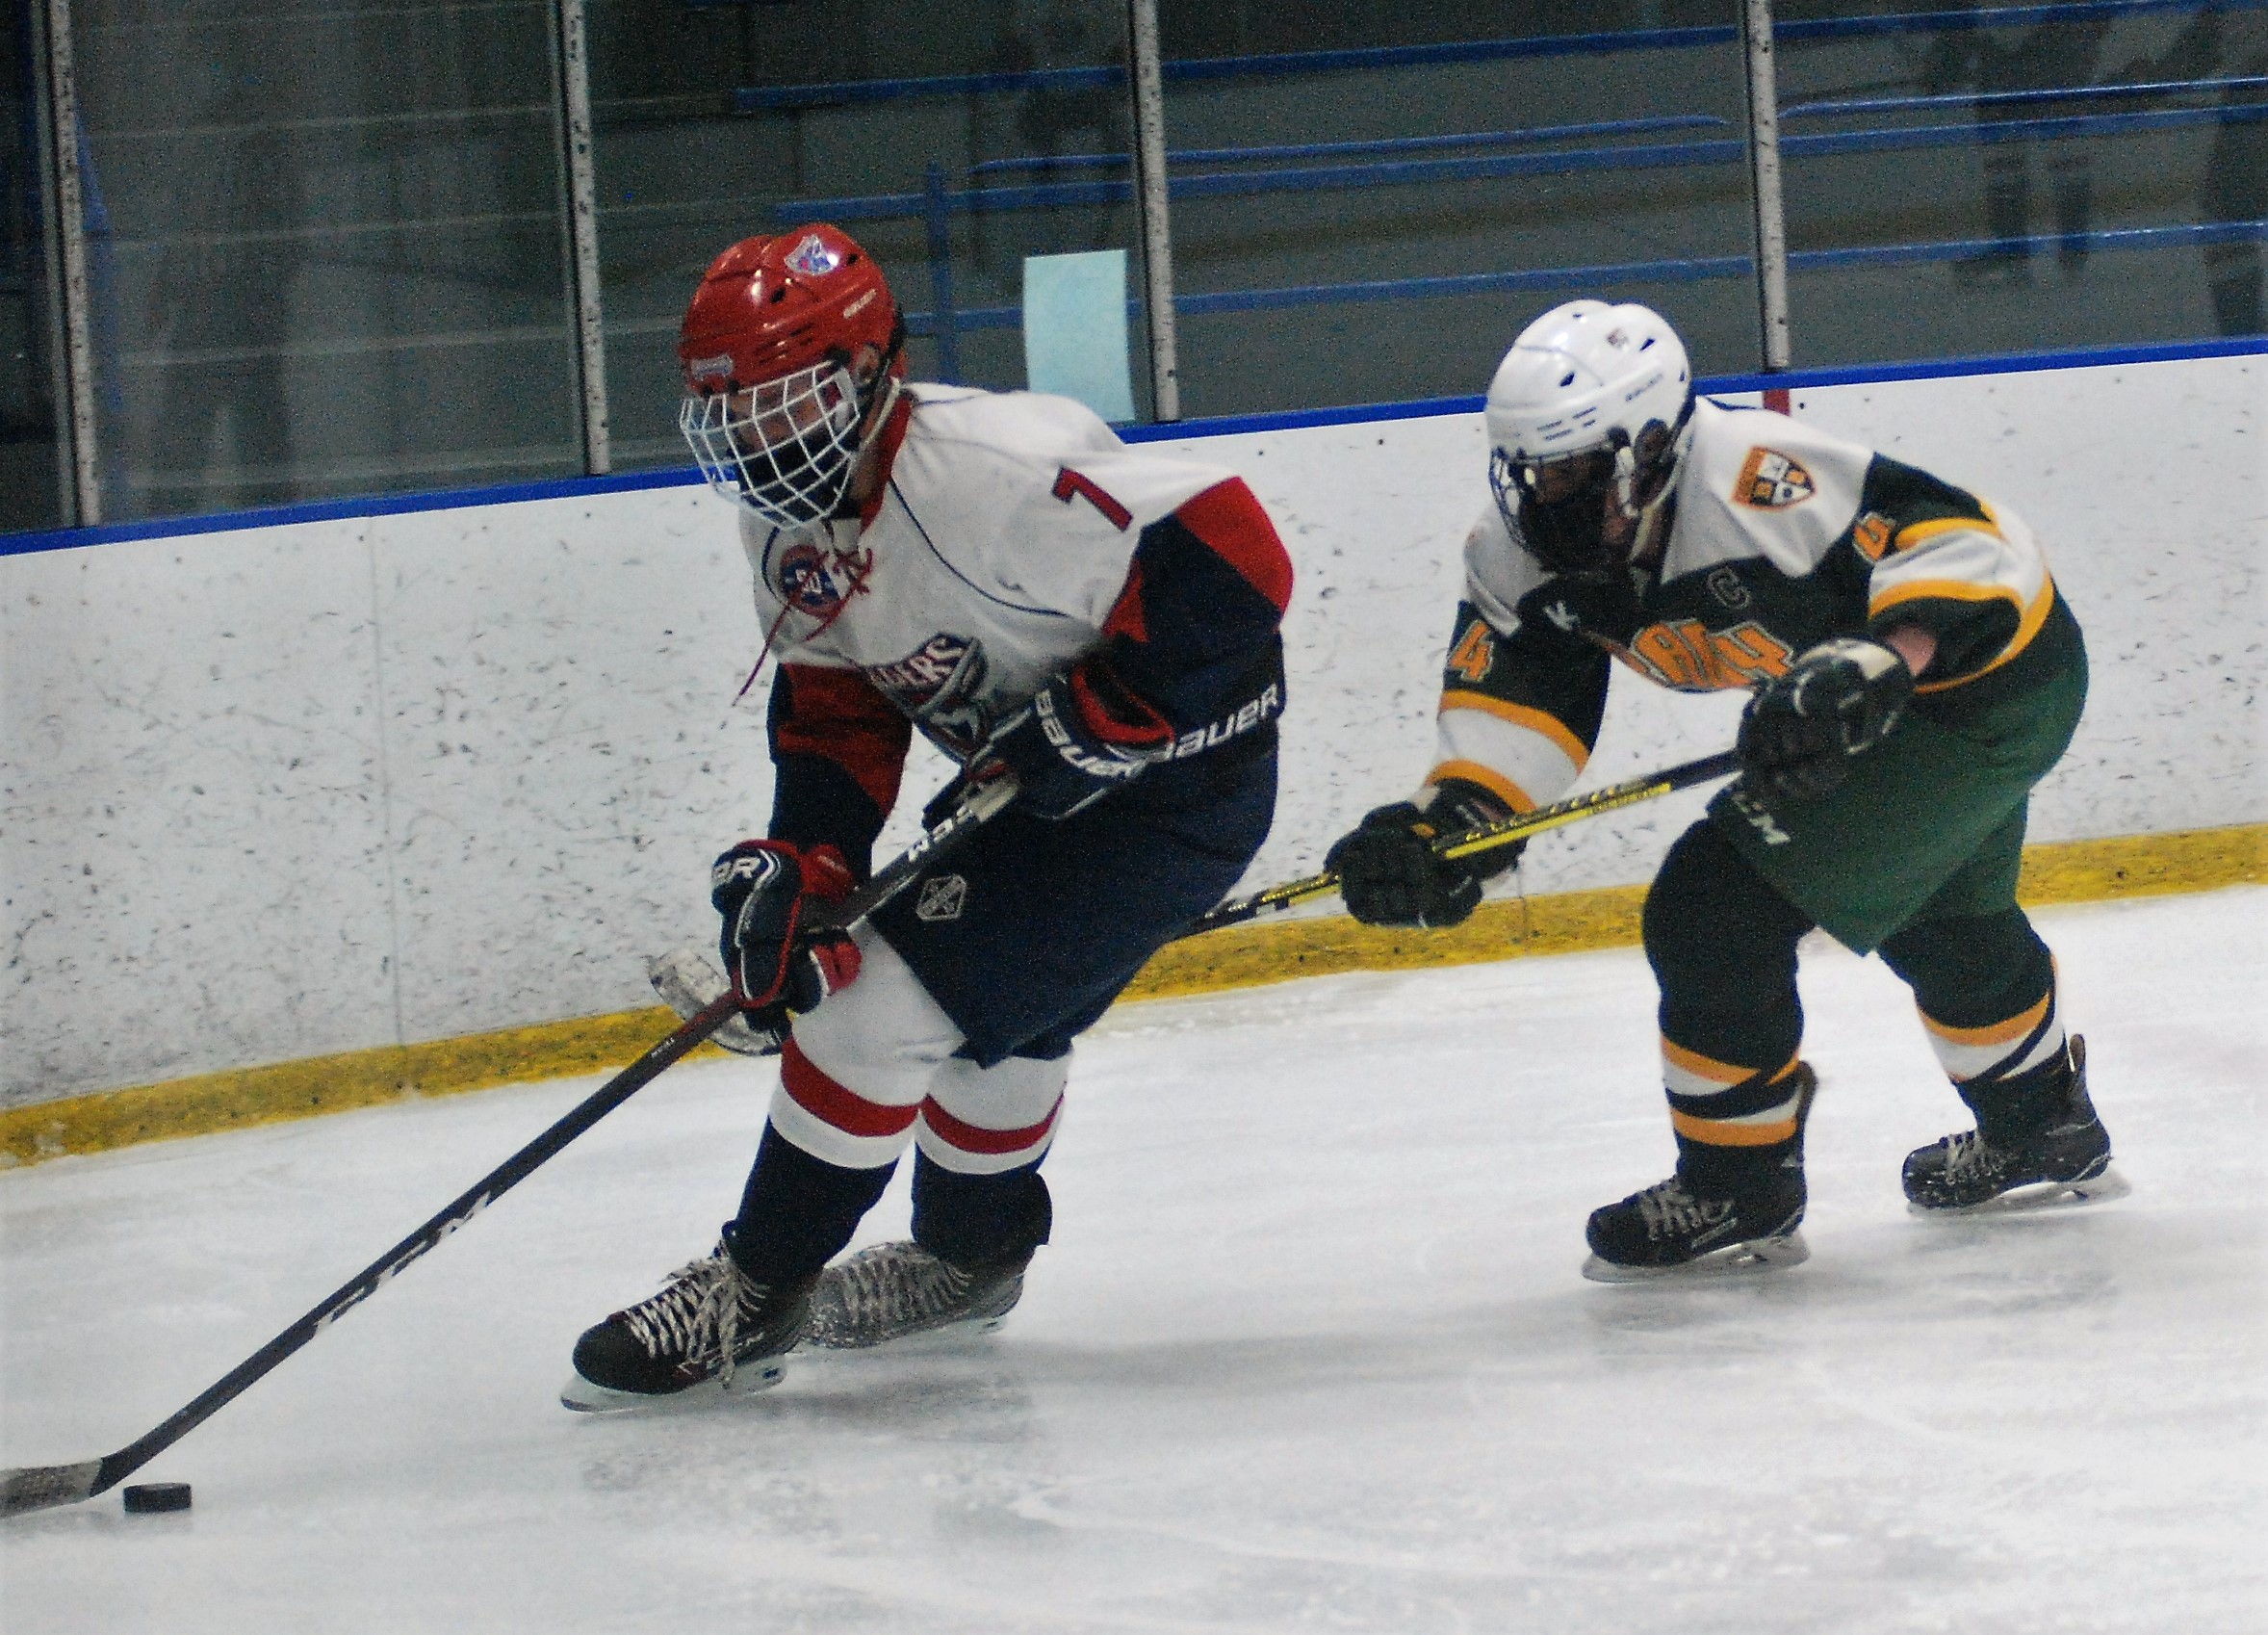 Collin Fields and Darren Earley chasing the puck.